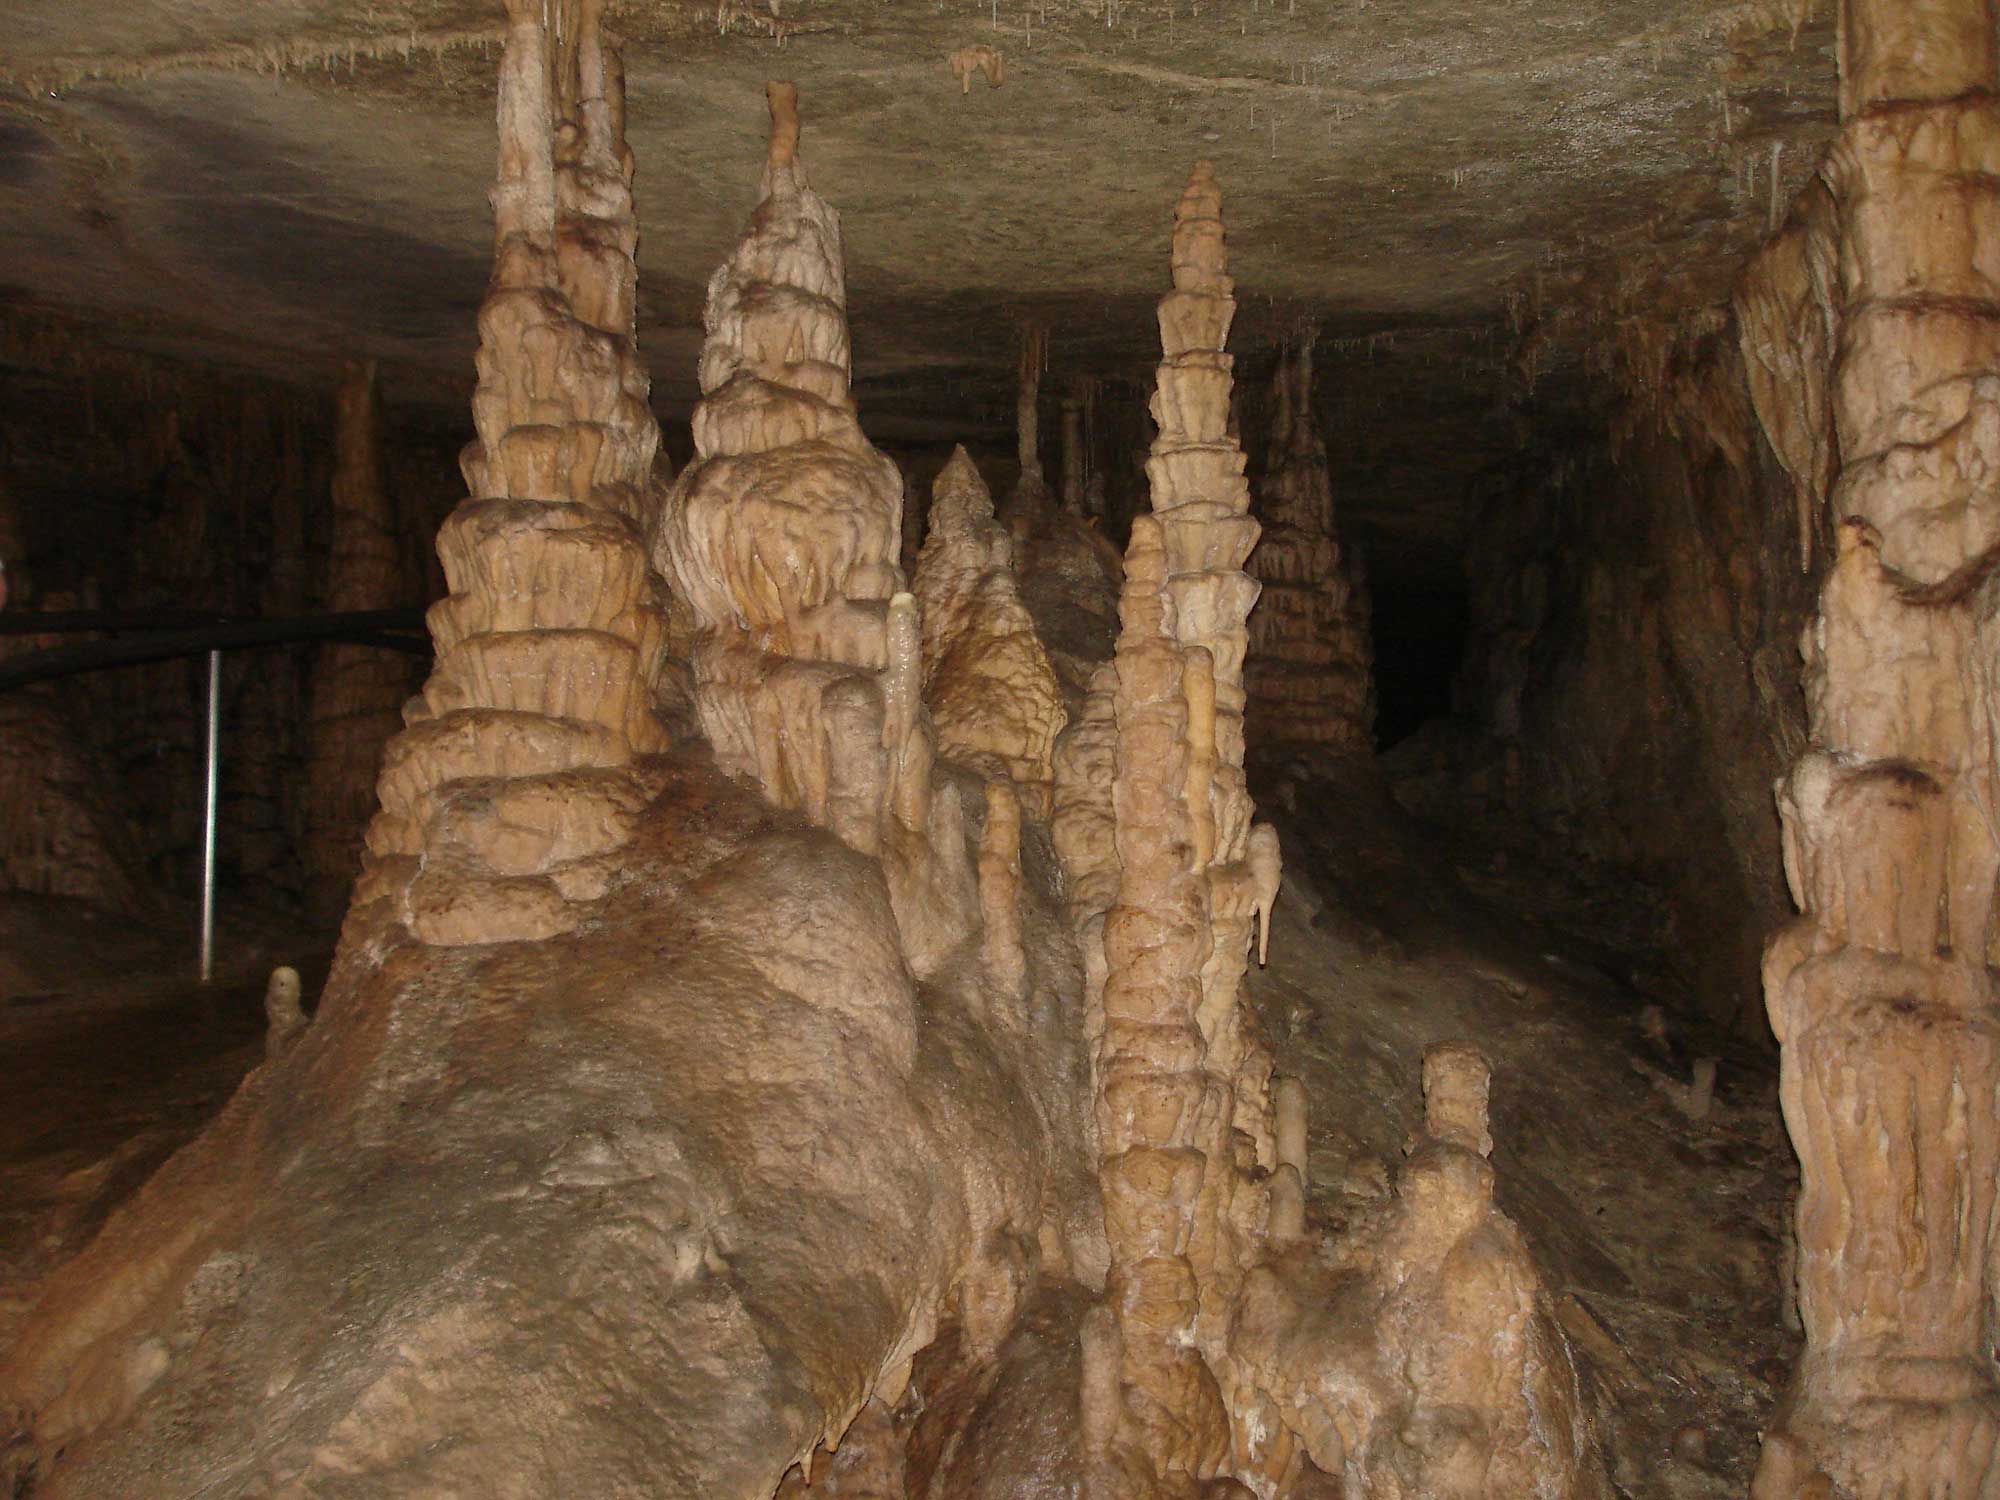 Photograph inside of Mammoth Cave in Kentucky.